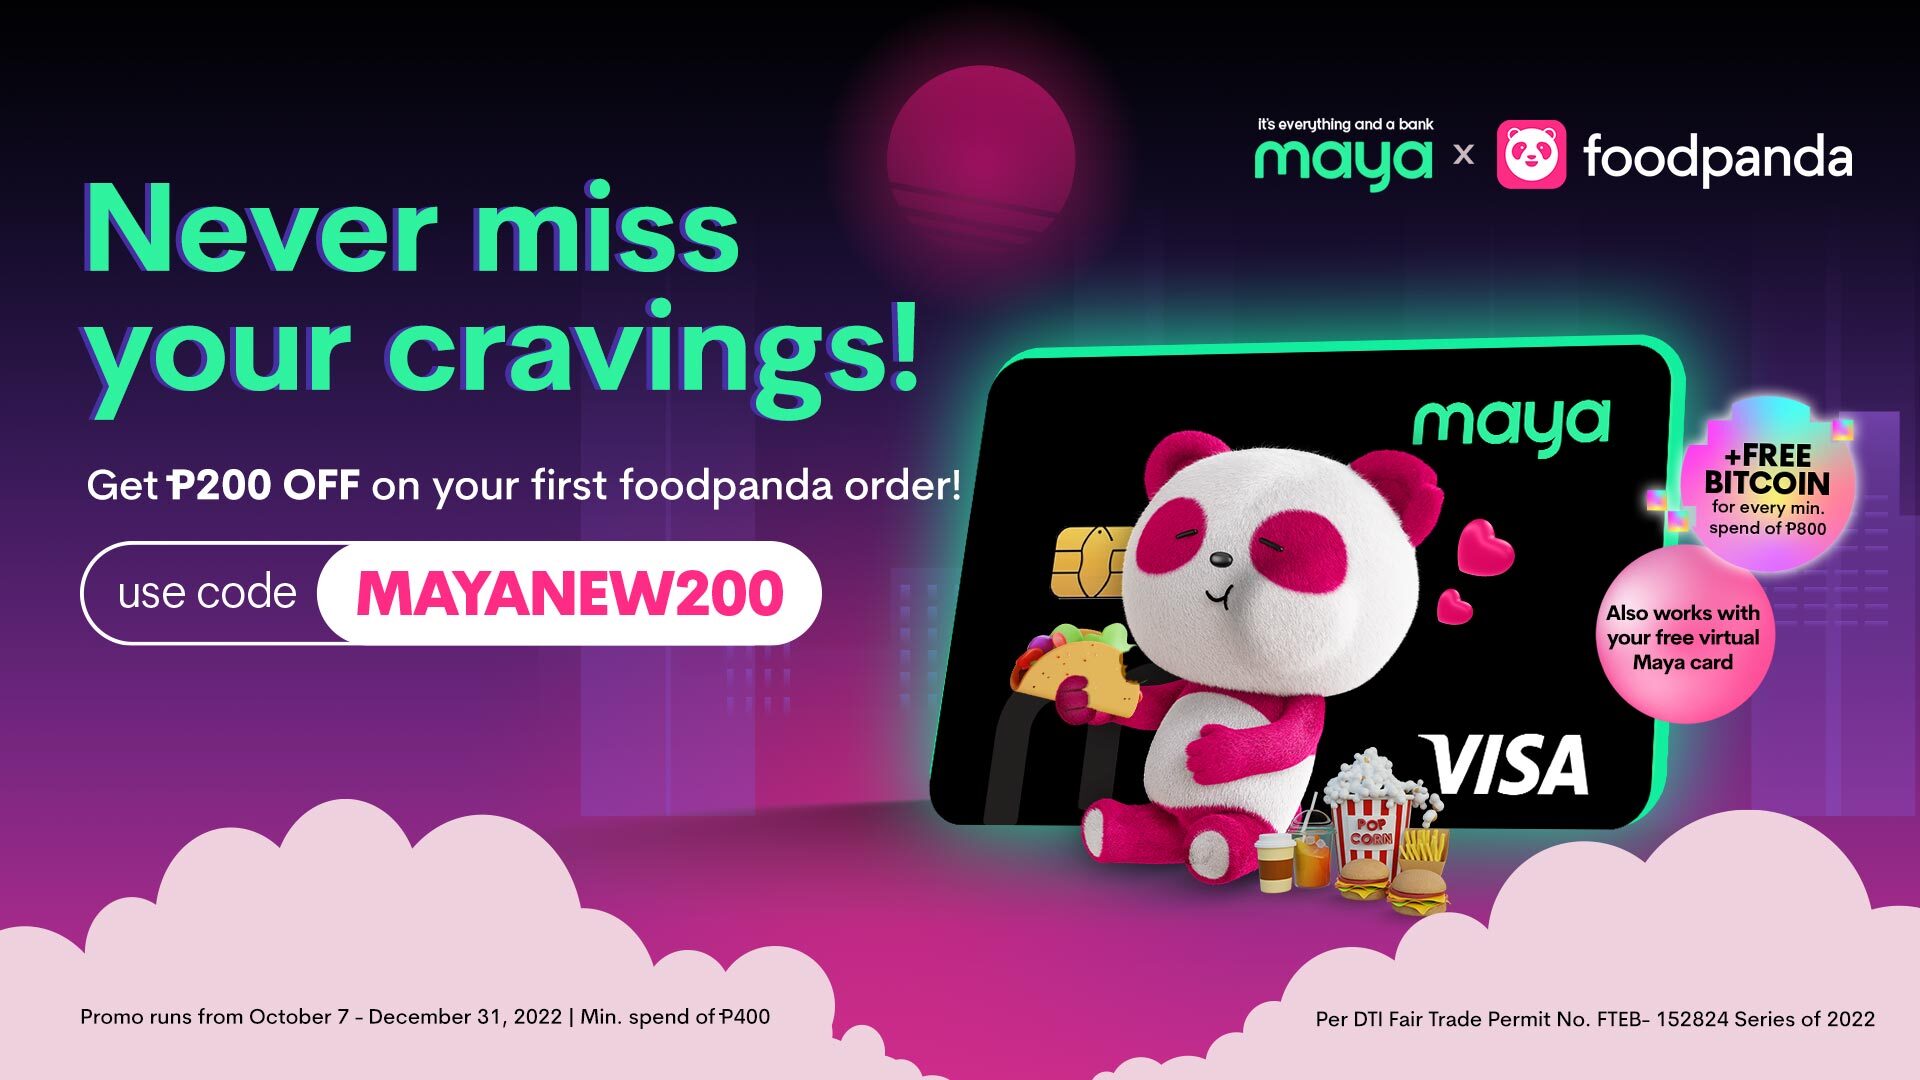 Get P200 OFF on your first foodpanda order with your Maya card!